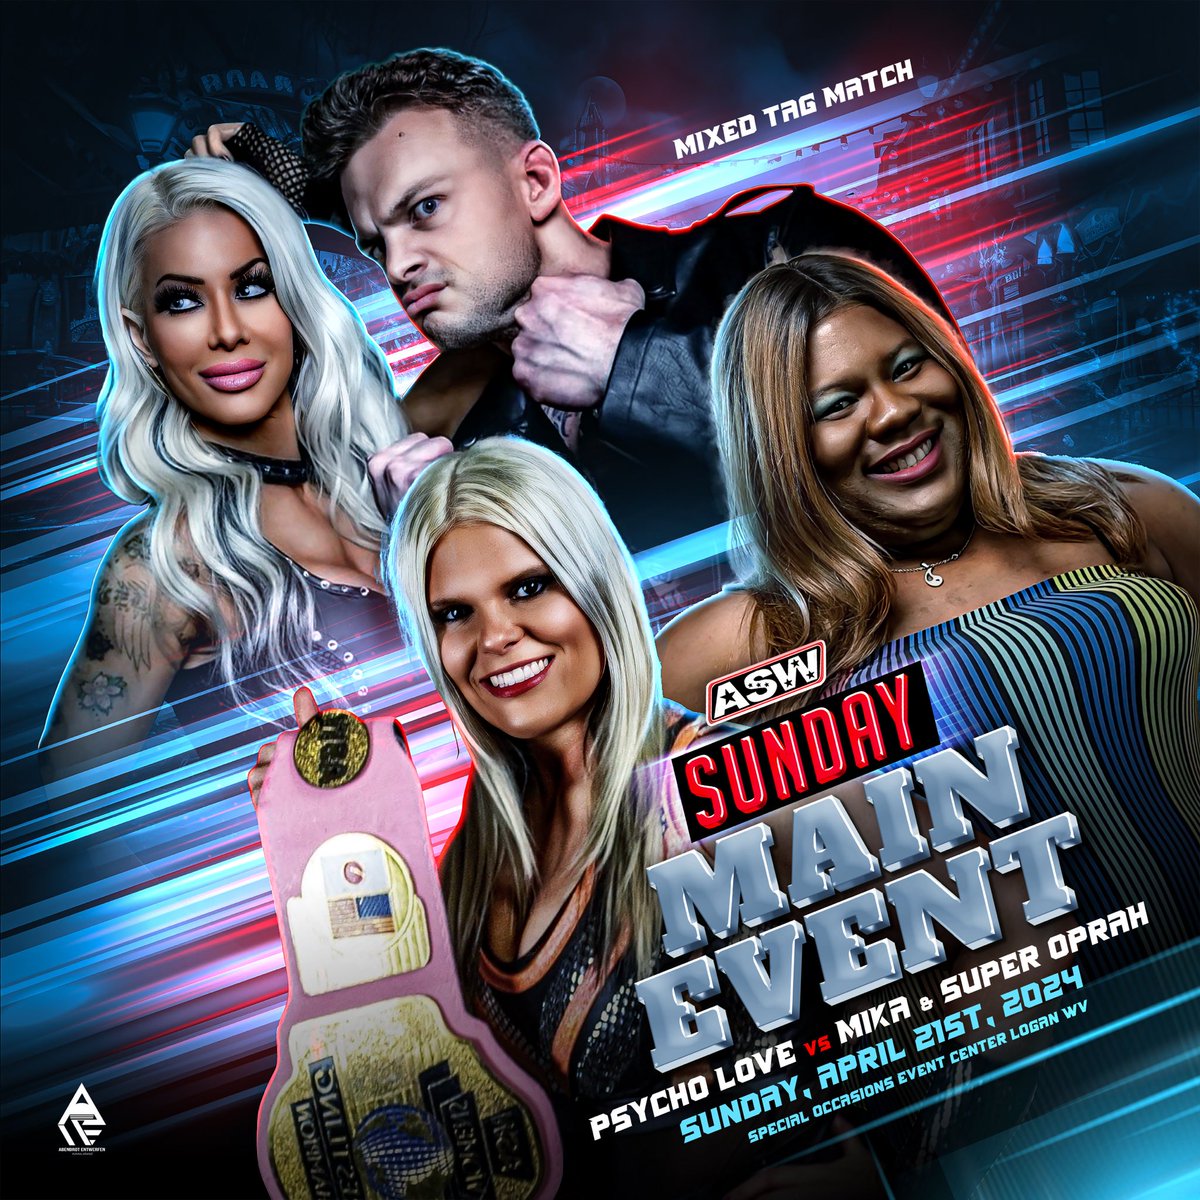 Psycho Love Returns To All Star Star Wrestling To Deliver An Epic Beatdown To Nurse Mika And Super Oprah At Sunday Night Main Event. These Two Are Very Familiar With Being On The Losing End Of Things And Coming Up Short Is Never On The Agenda For Us!